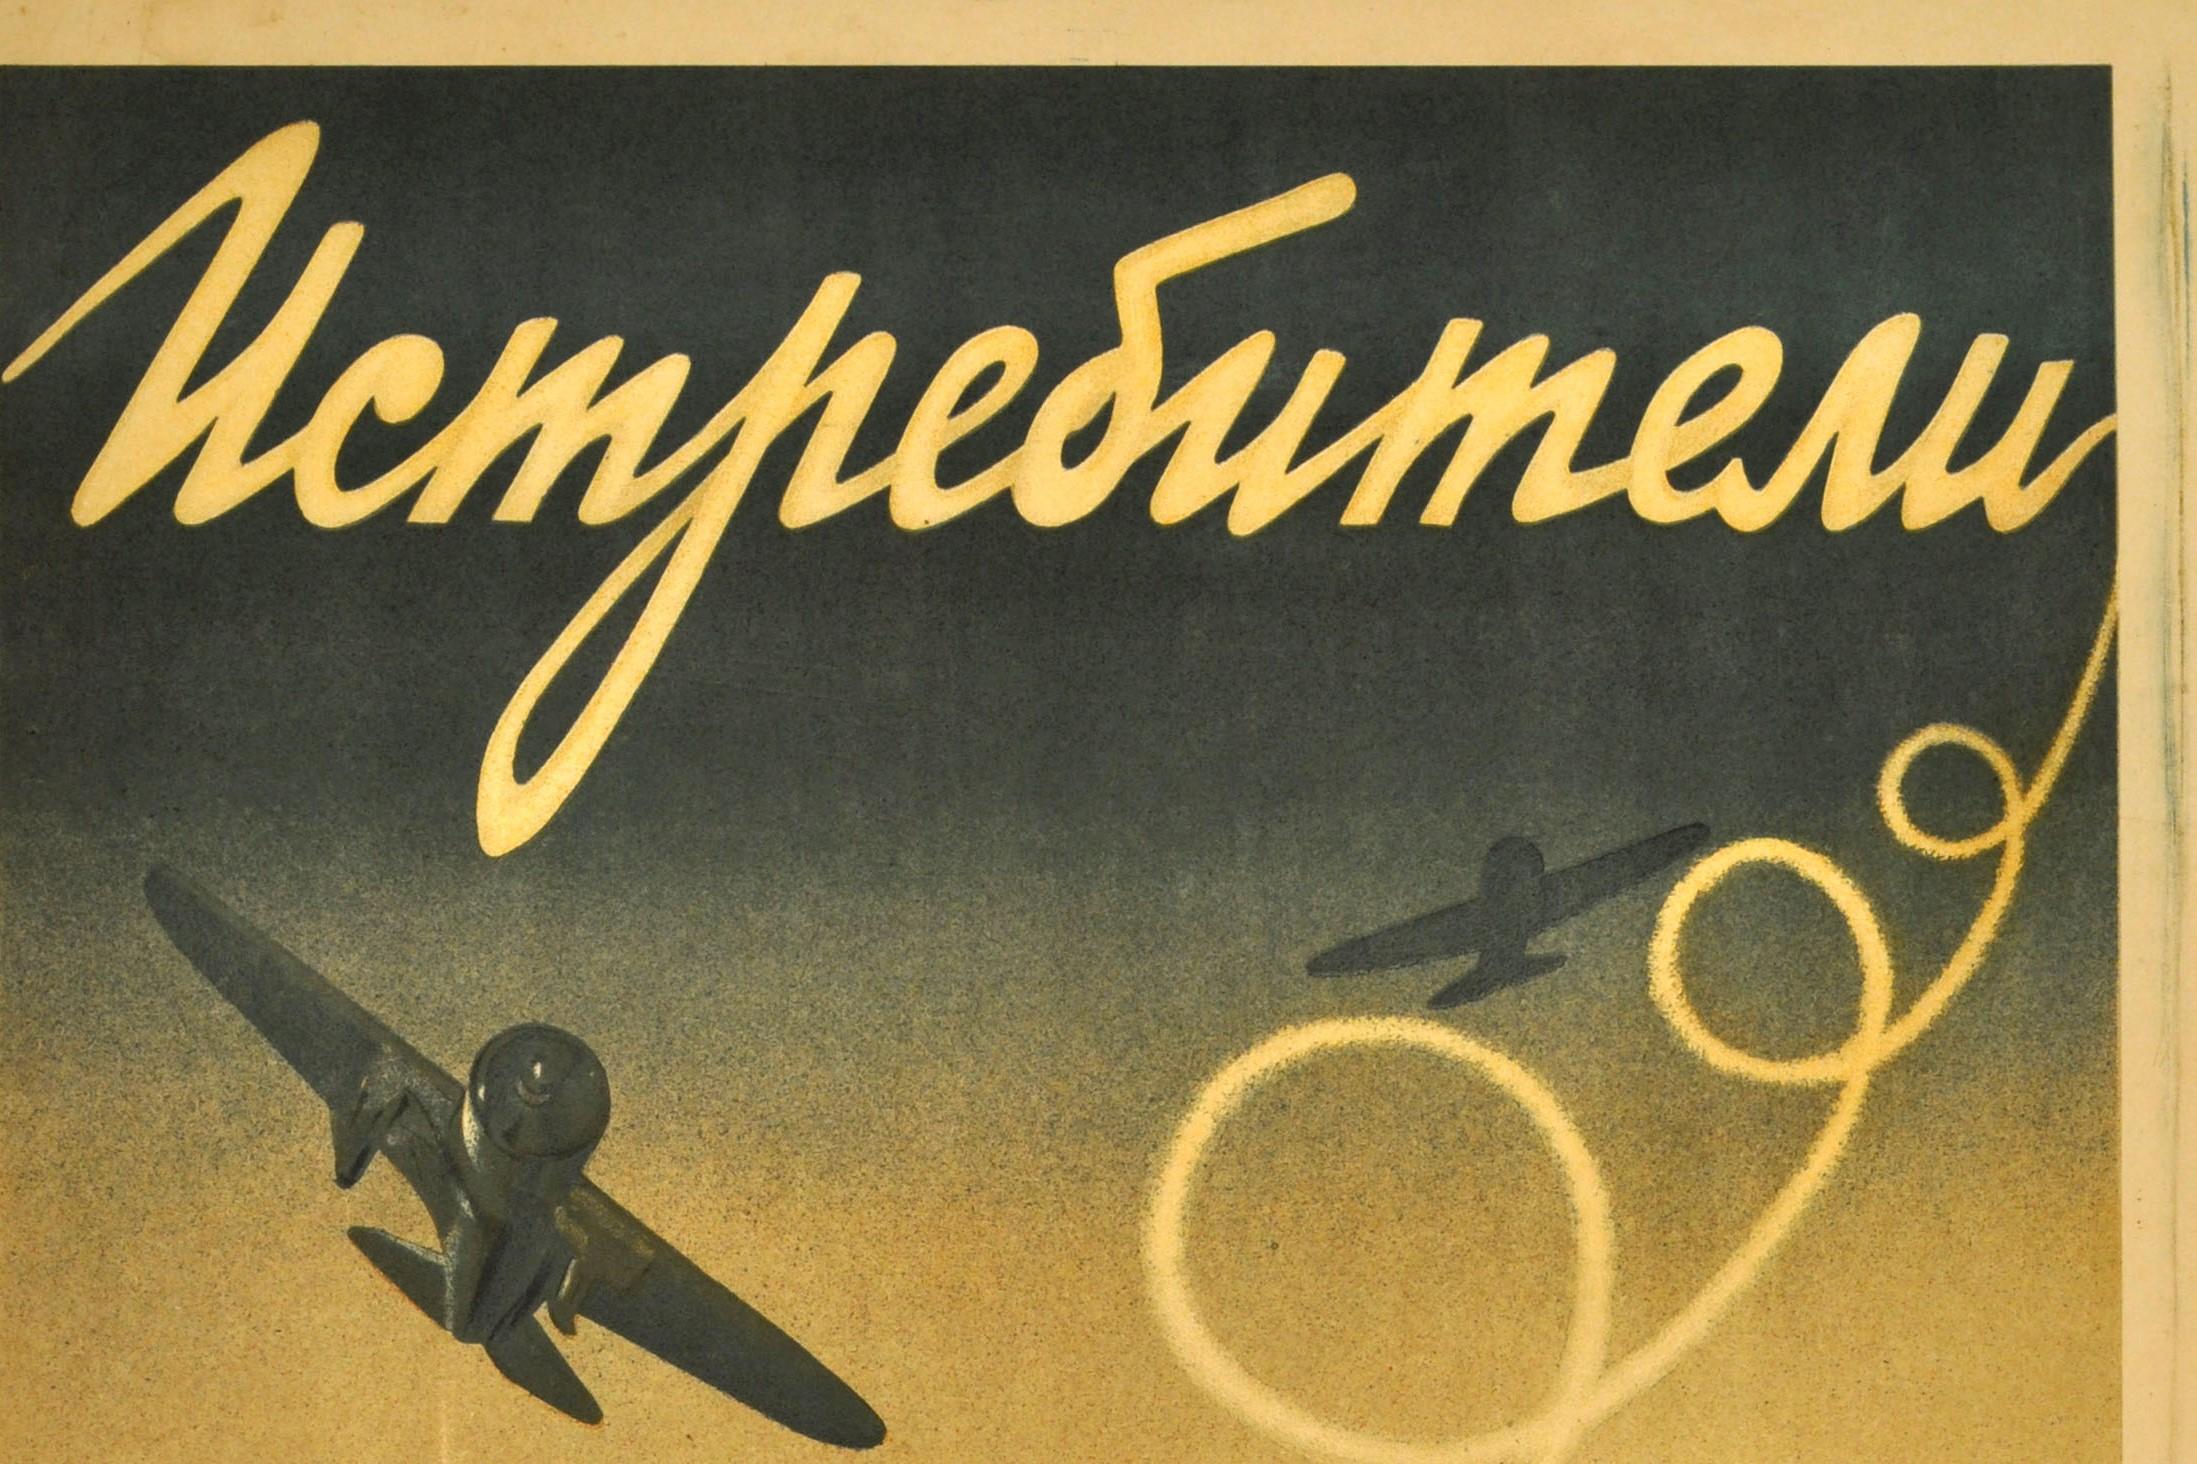 Original rare USSR film poster for a pre-World War Two film about the Soviet Air Force. Produced by the Kiev film studio in 1939, this is a sound production about the outstanding people of Soviet Aviation as specified in the caption on this poster.